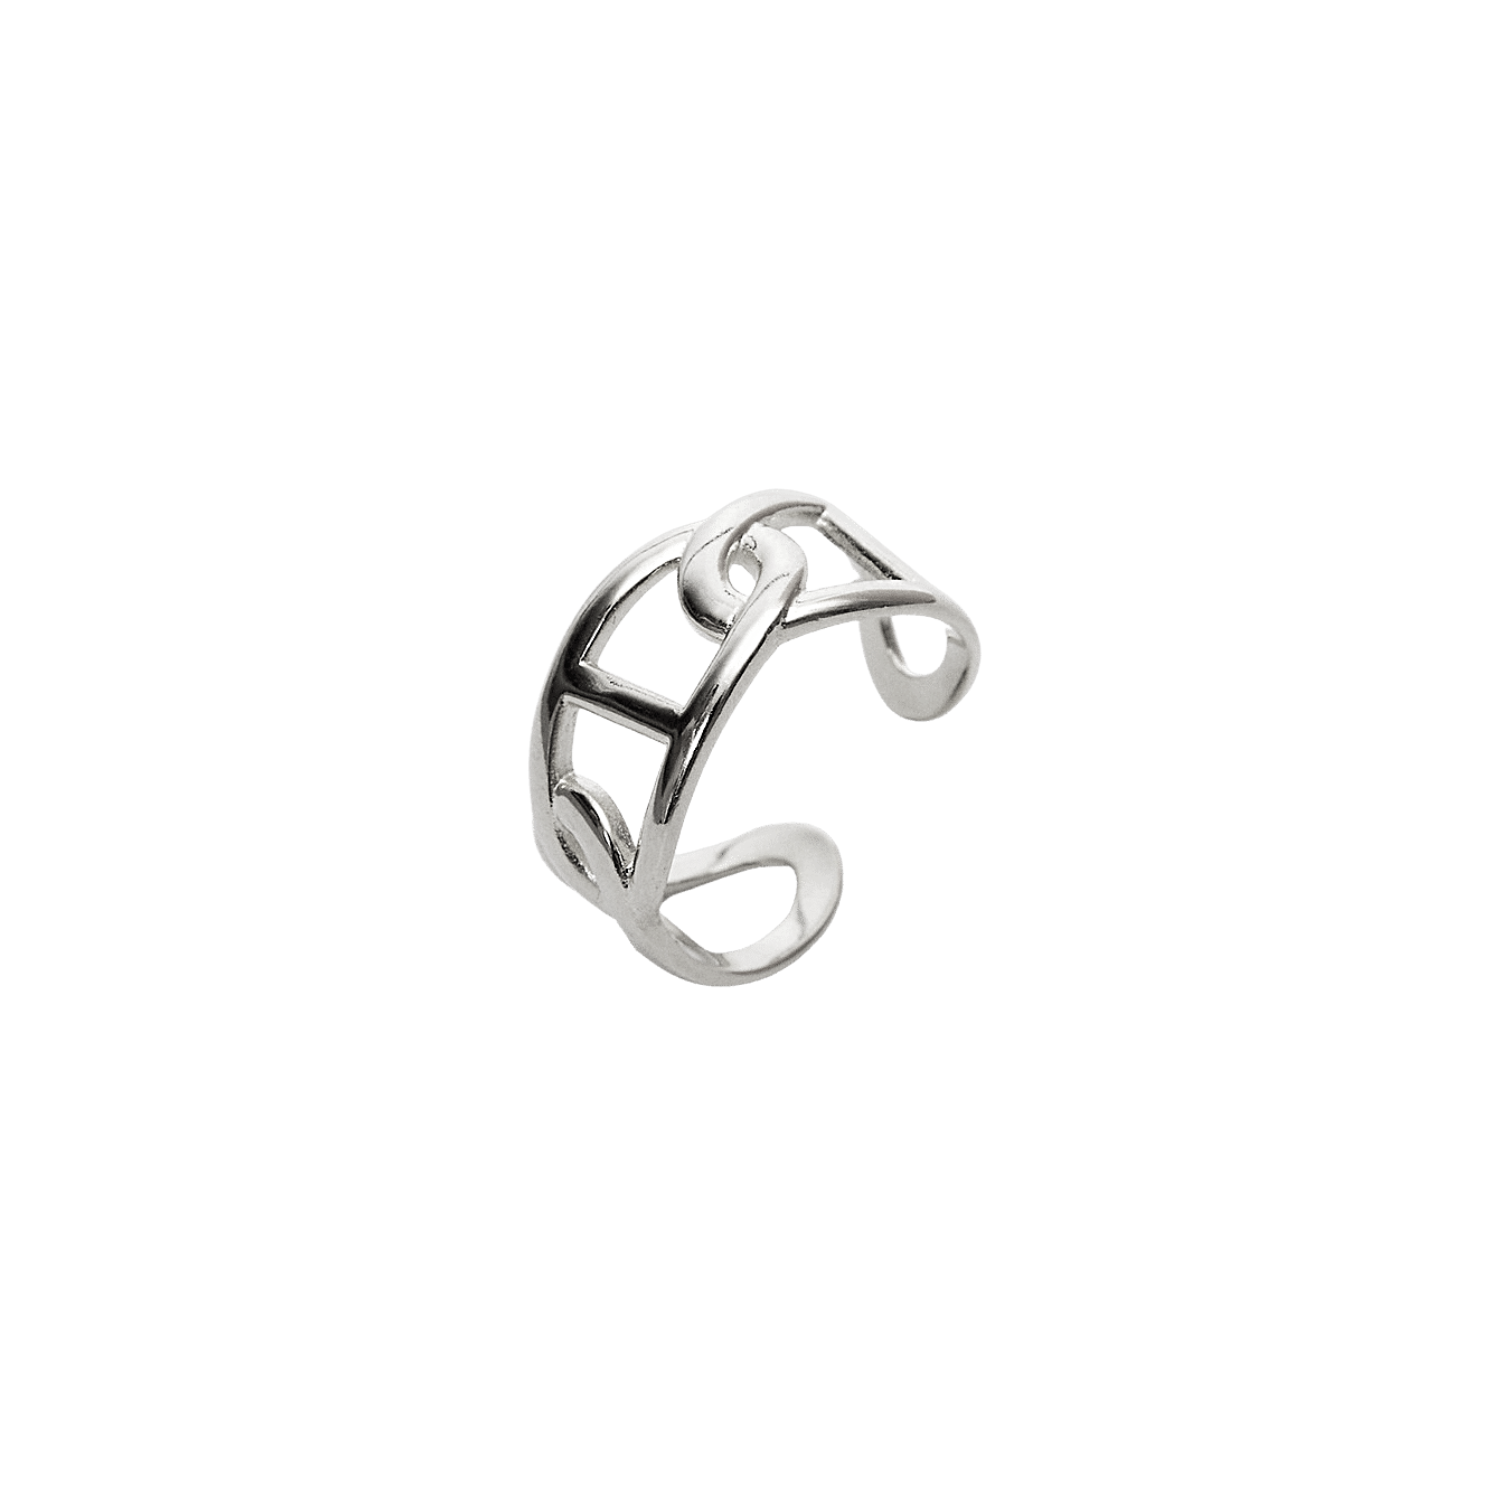 Large Chain Ring Sterling Silver